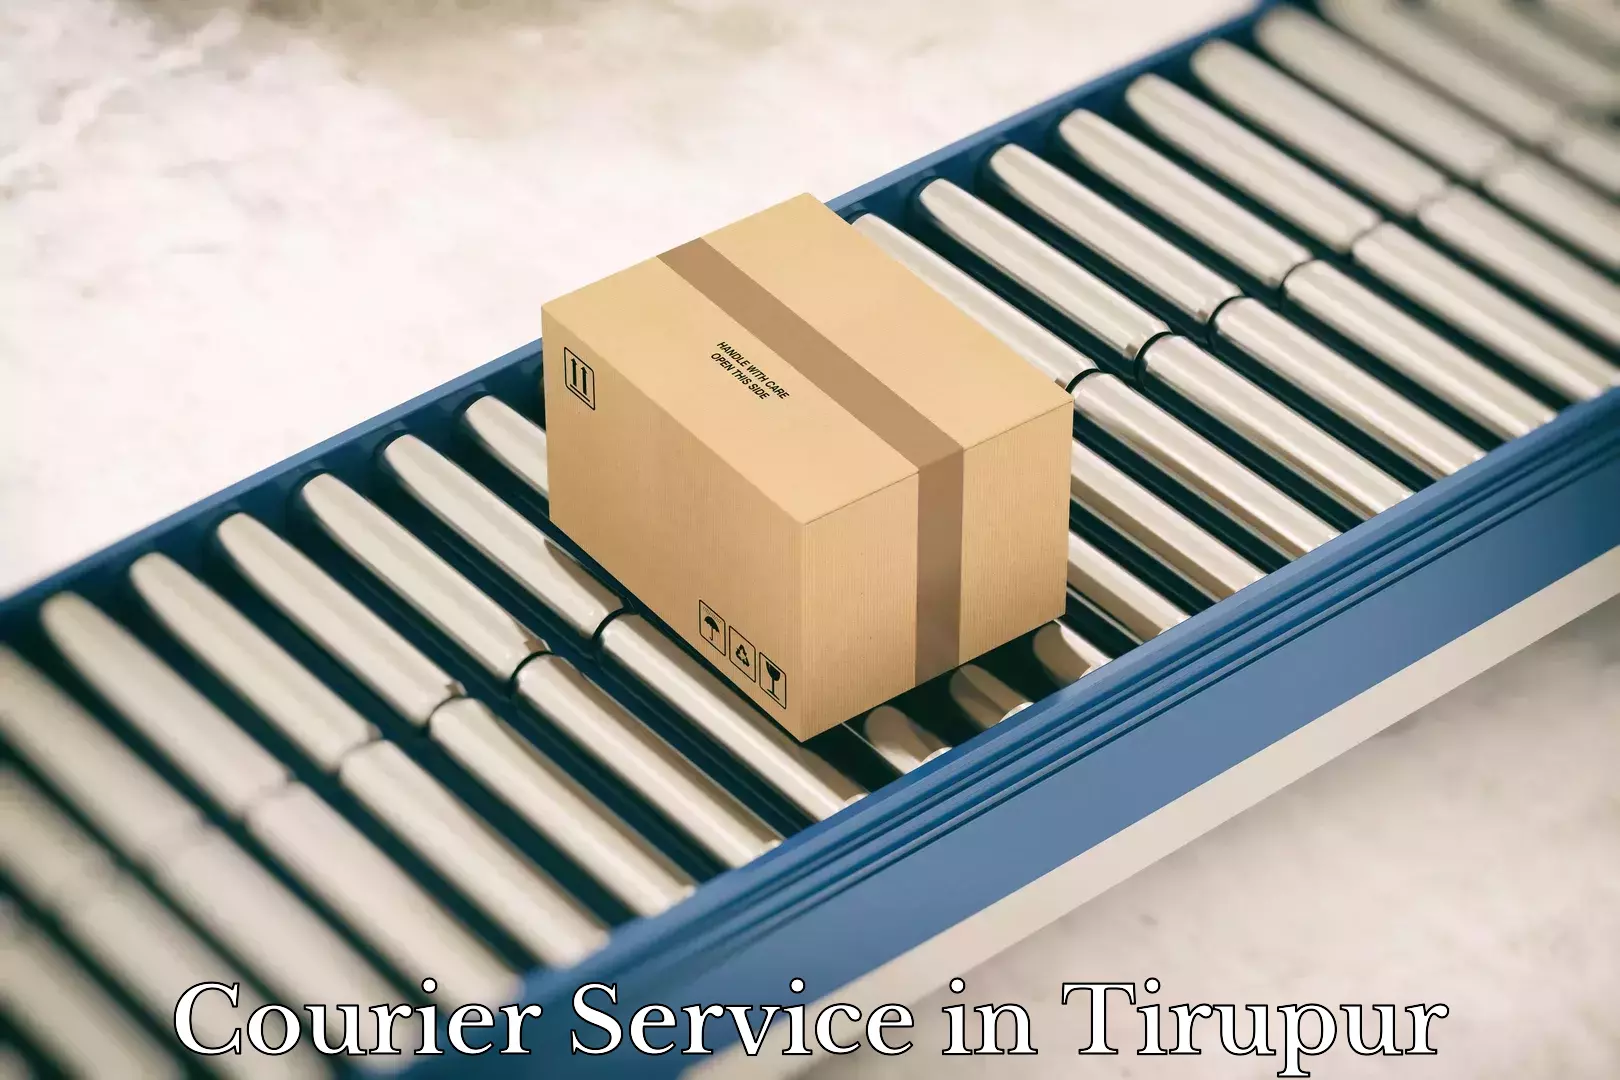 On-call courier service in Tirupur